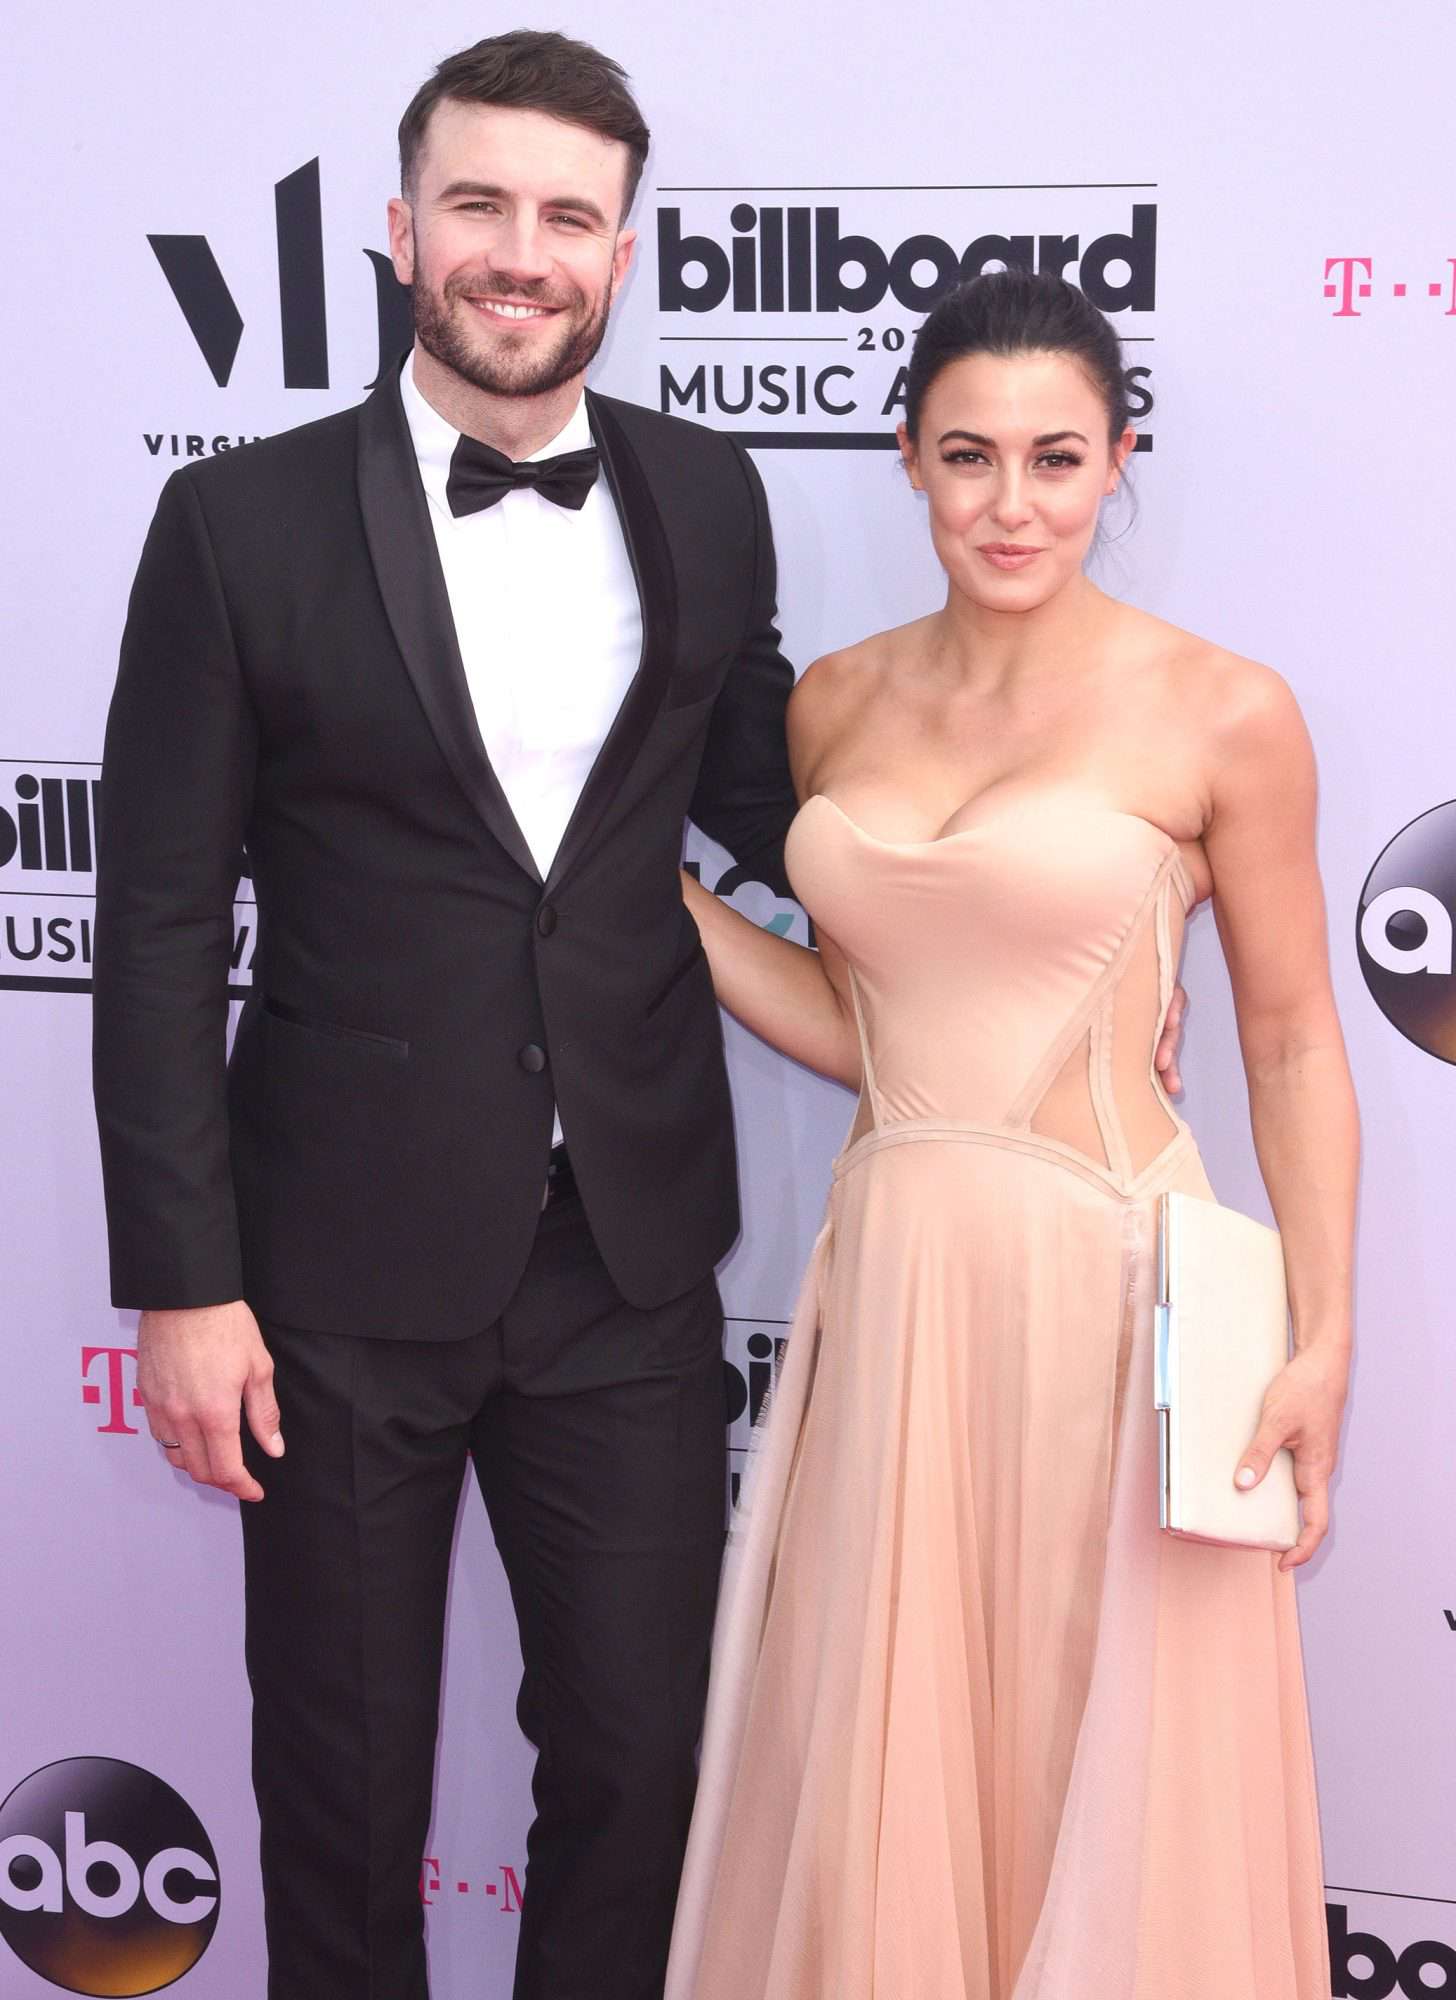 LAS VEGAS, NV - MAY 21: Singer Sam Hunt (L) and Hannah Lee Fowler arrive at 2017 Billboard Music Awards at T-Mobile Arena on May 21, 2017 in Las Vegas, Nevada. (Photo by C Flanigan/Getty Images)